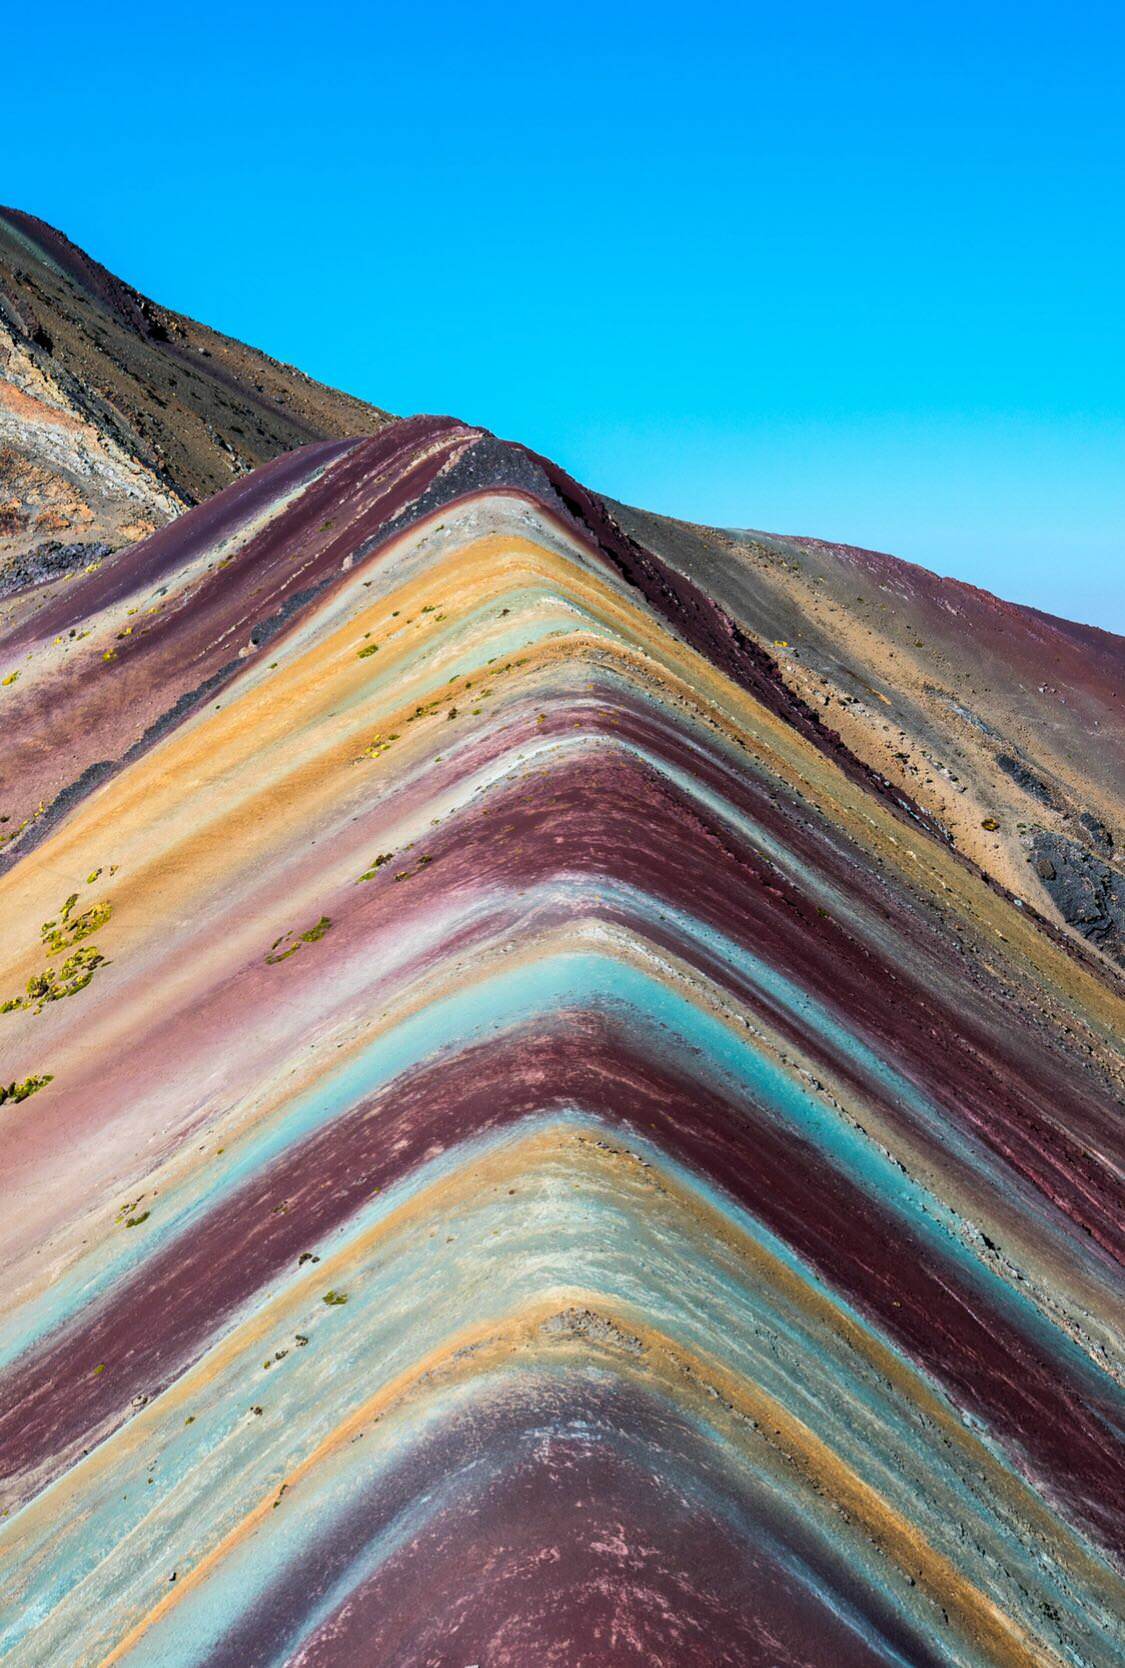 Rainbow Mountain In Peru Peaks At Just Over 17,000 Feet